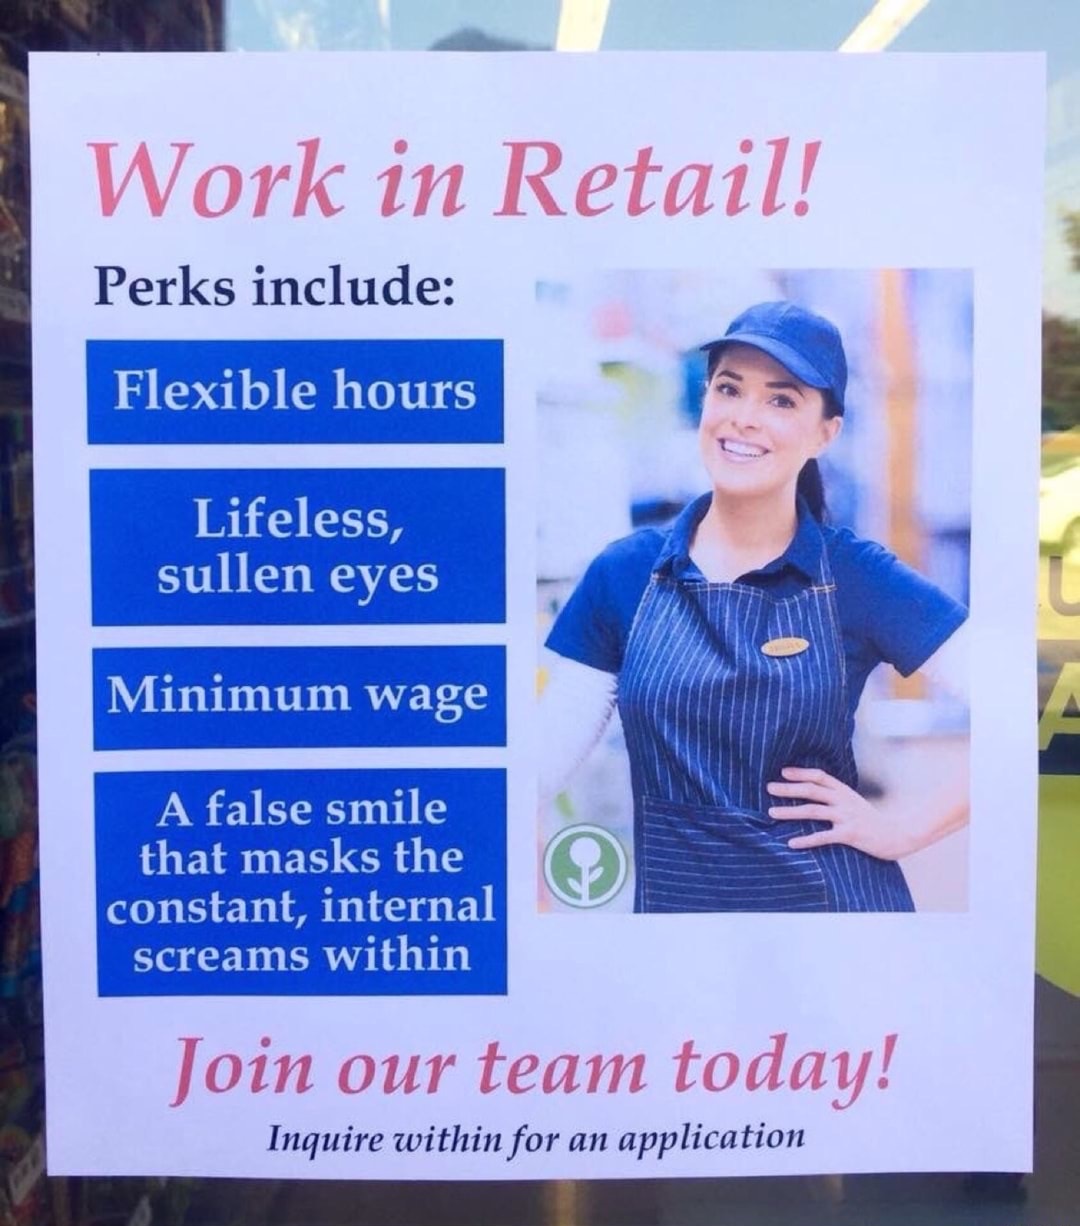 Savage memes - of a work in retail meme - Work in Retail! Perks include Flexible hours Lifeless, sullen eyes Minimum wage A false smile that masks the constant, internal screams within Join our team today! Inquire within for an application